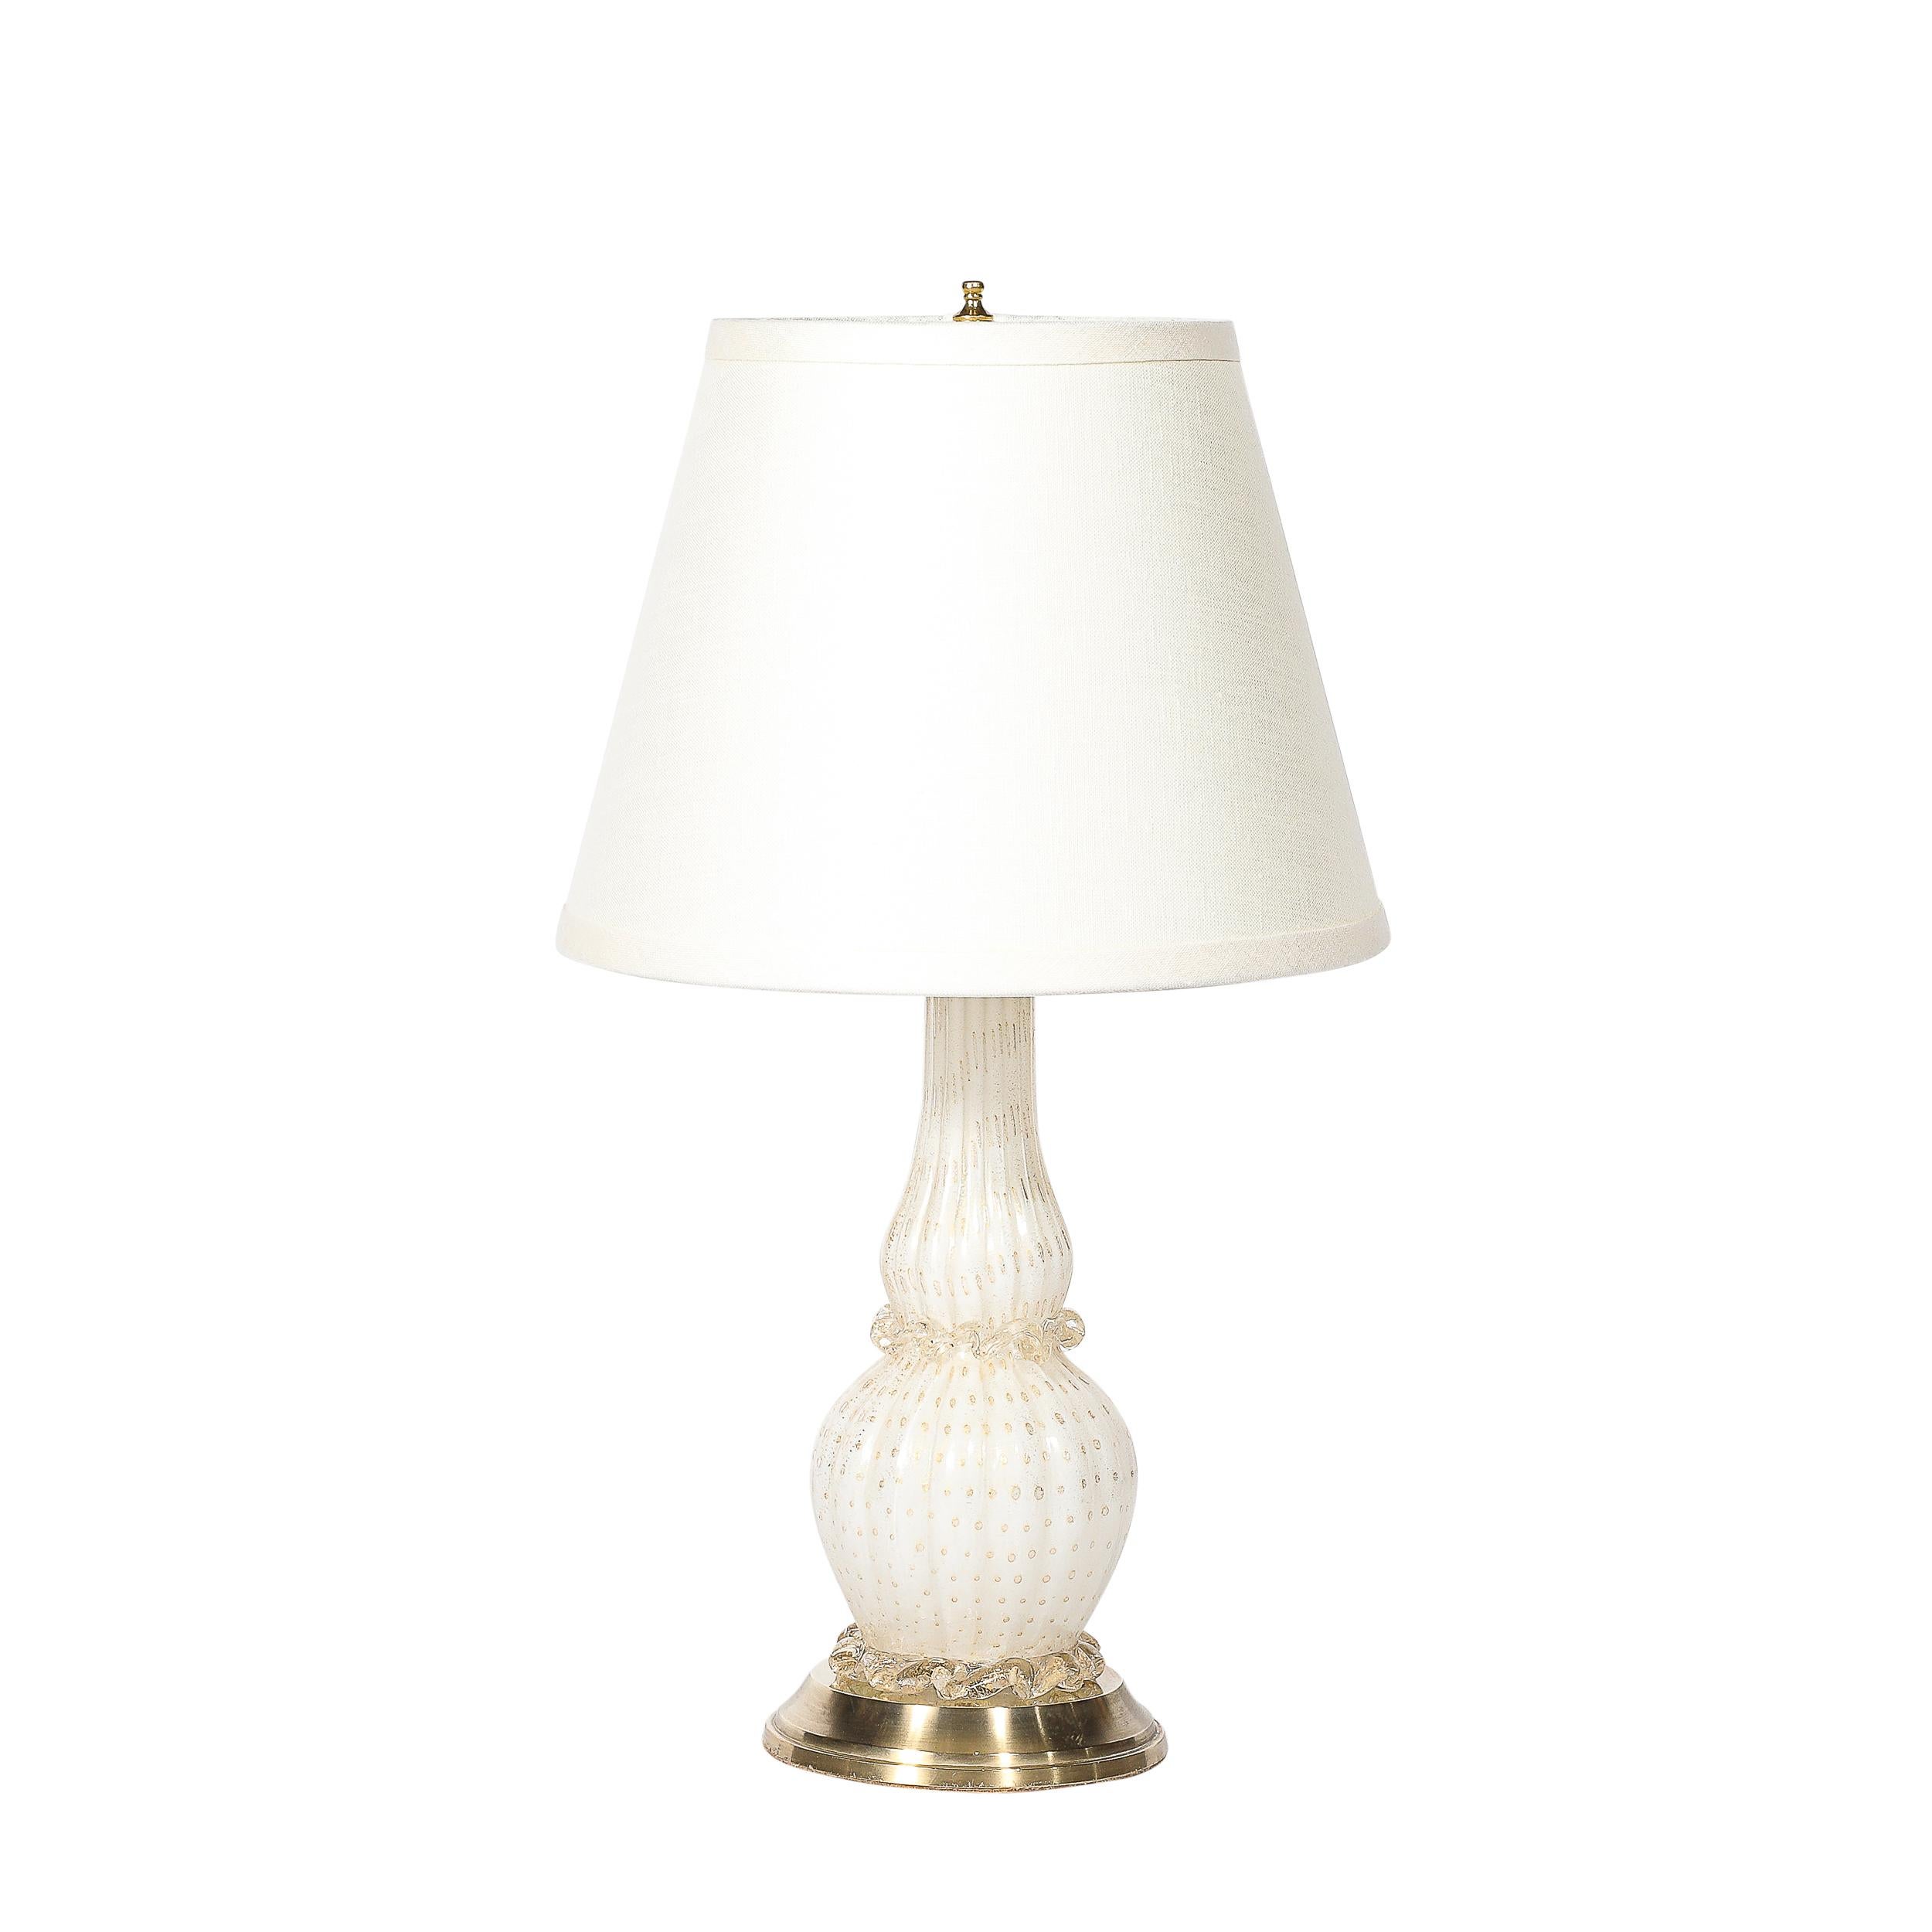 This delightful Pair of Mid-Century Modernist Hand-Blown Murano Glass Table Lamps in White W/24 Karat Gold Flecks and Brass Fittings originates from Italy, Circa 1950. Featuring a tiered geometric polished brass base on which the body of the lamps